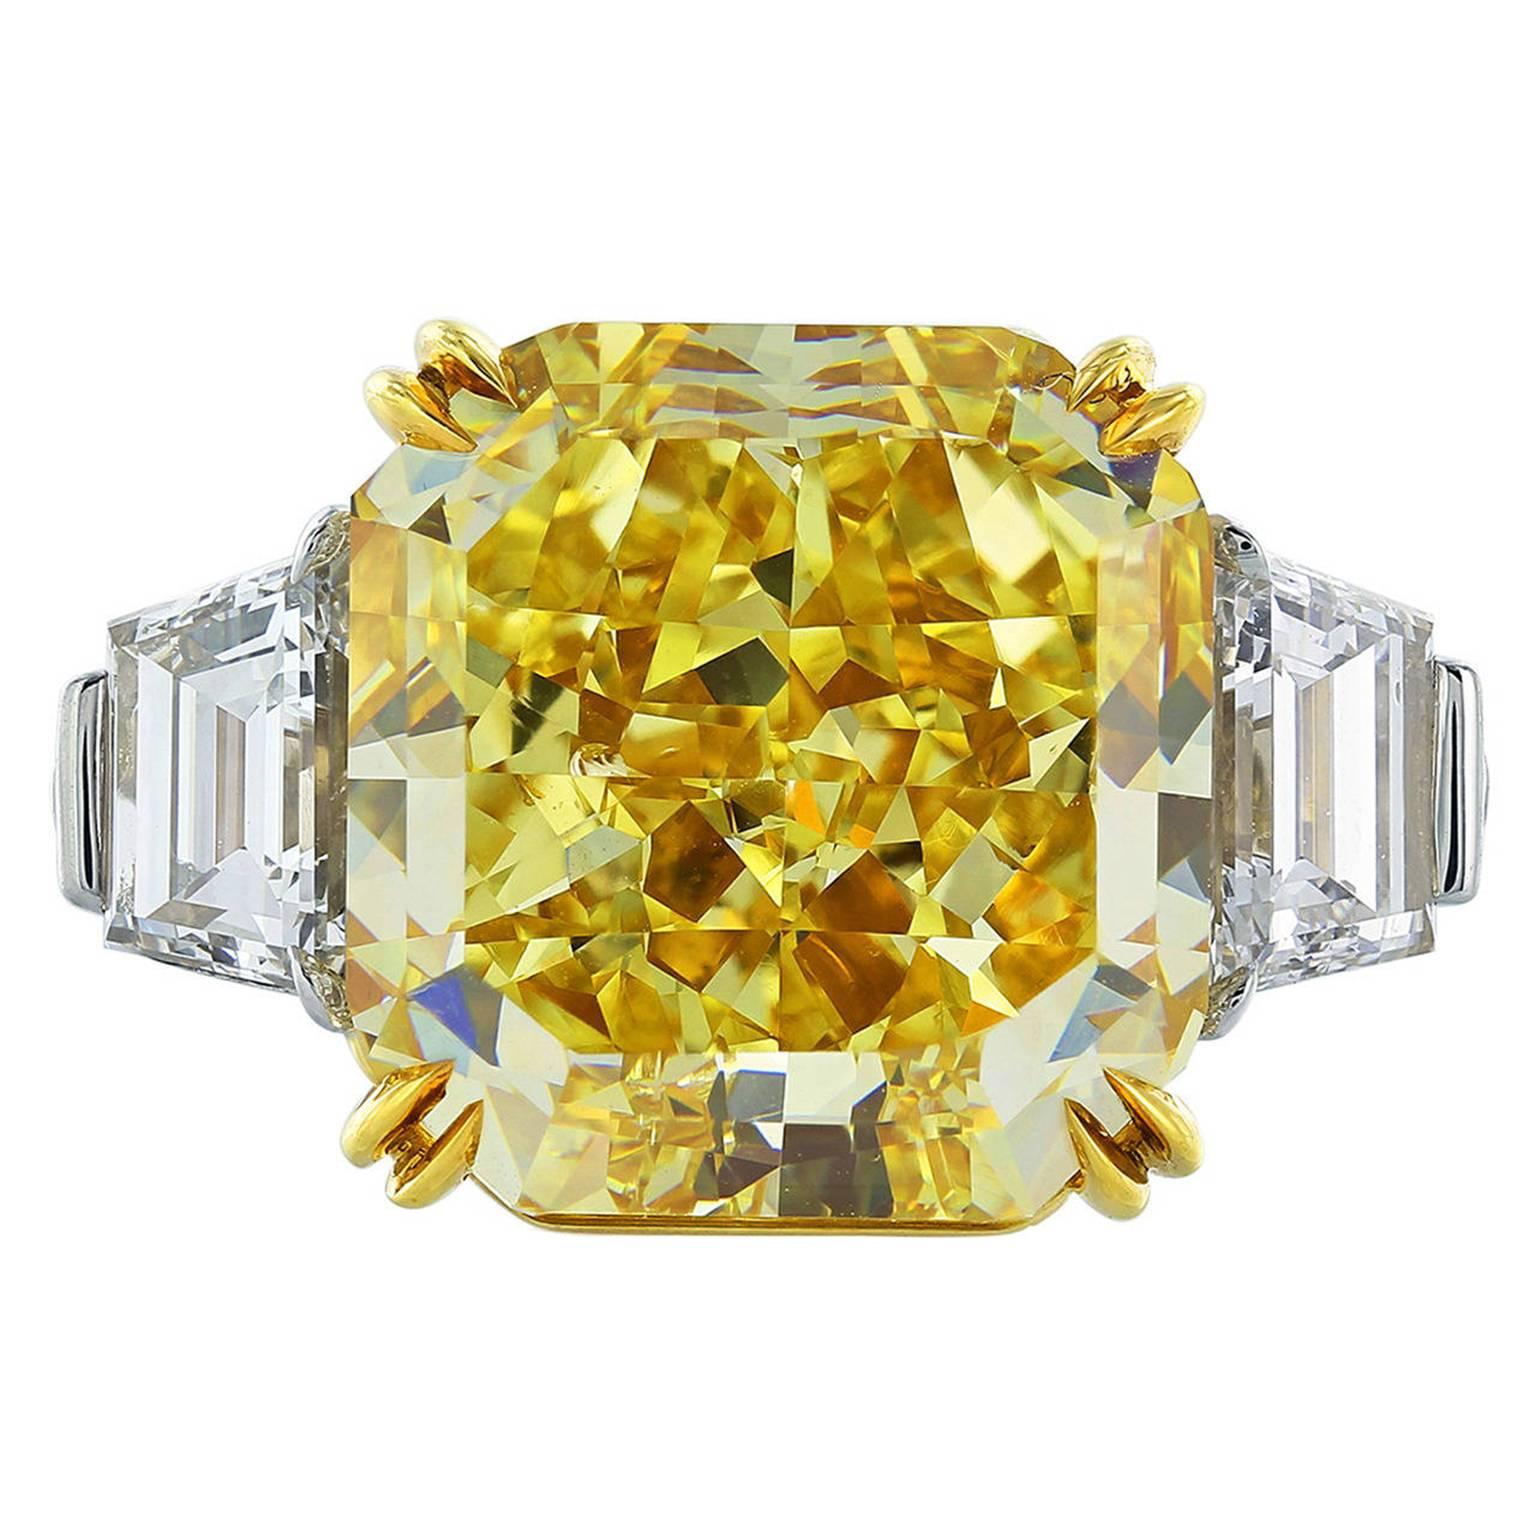 Magnificent 10.18 Carat Fancy Intense Yellow Internally Flawless Diamond Ring For Sale